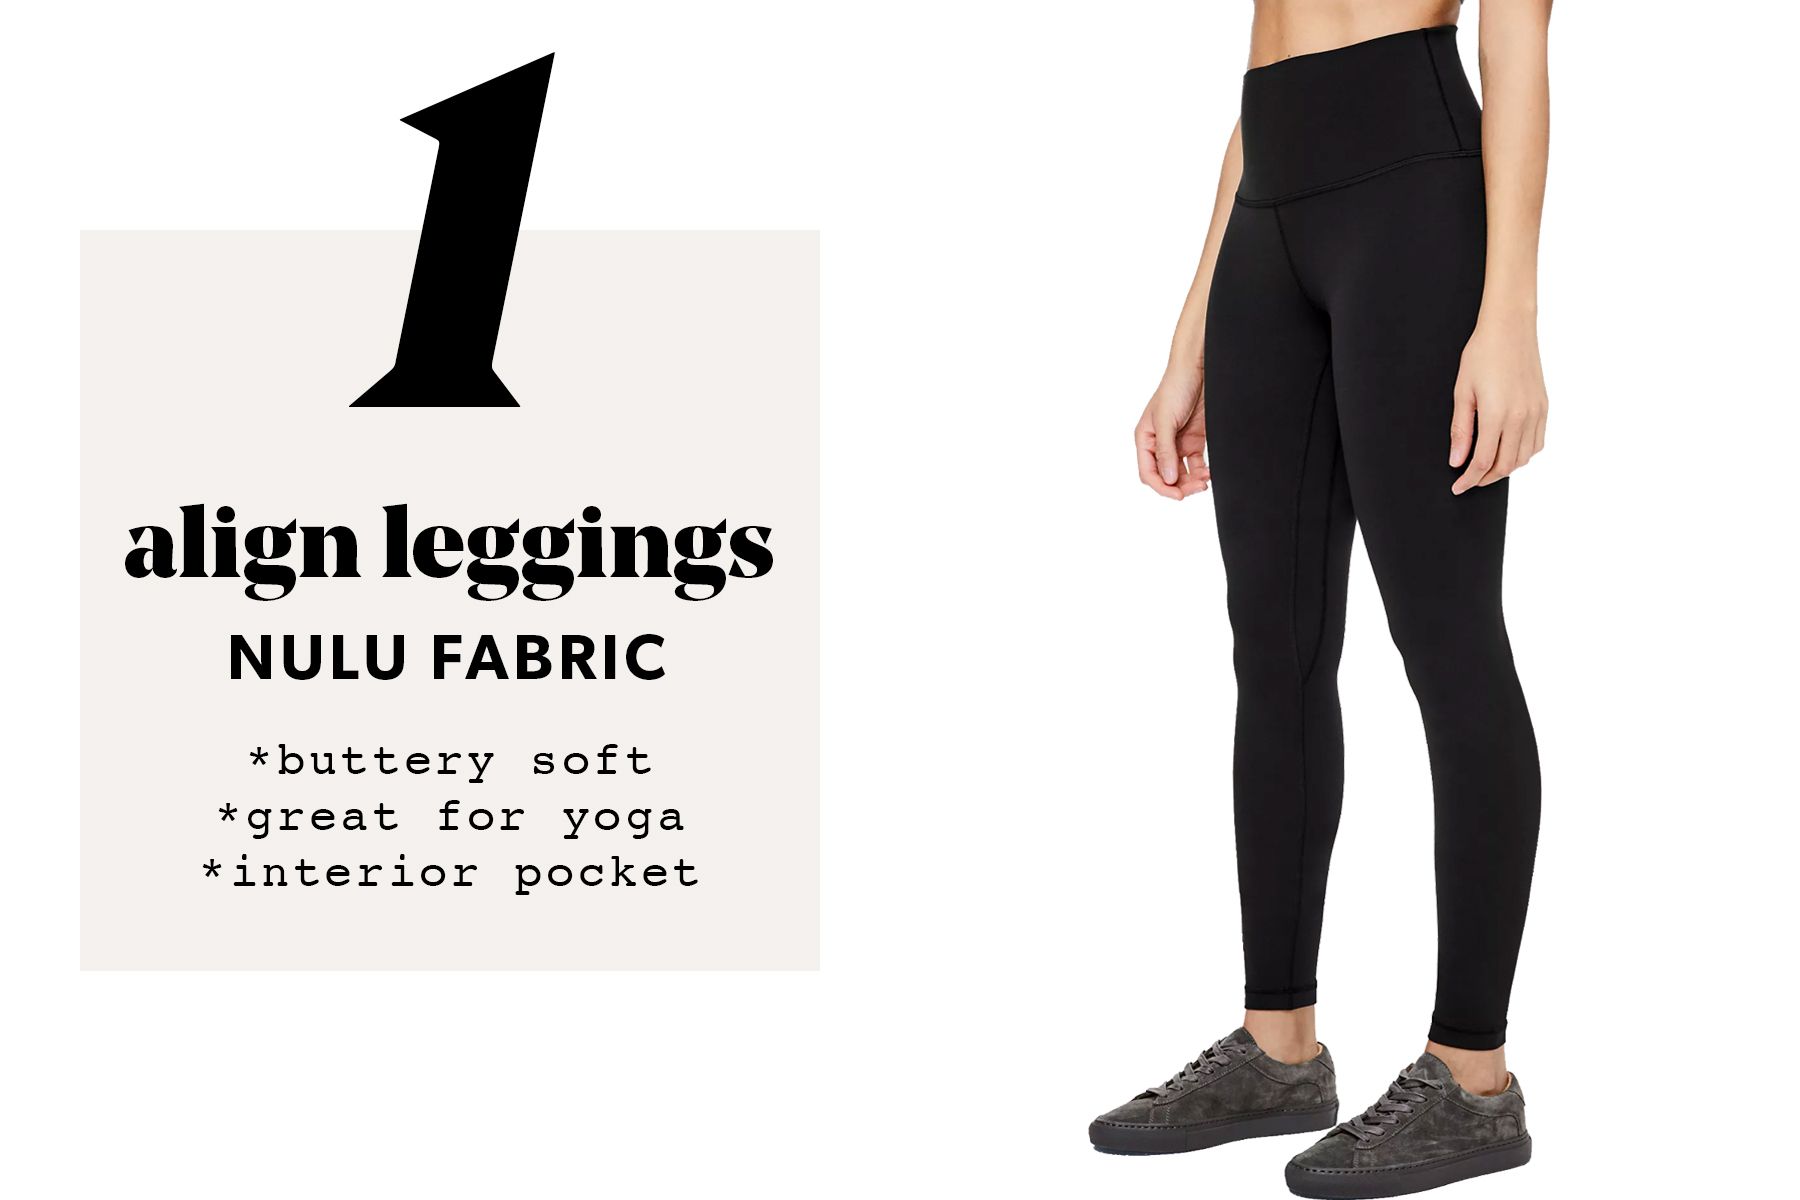 A List Of 38 Types Of Pants For Women